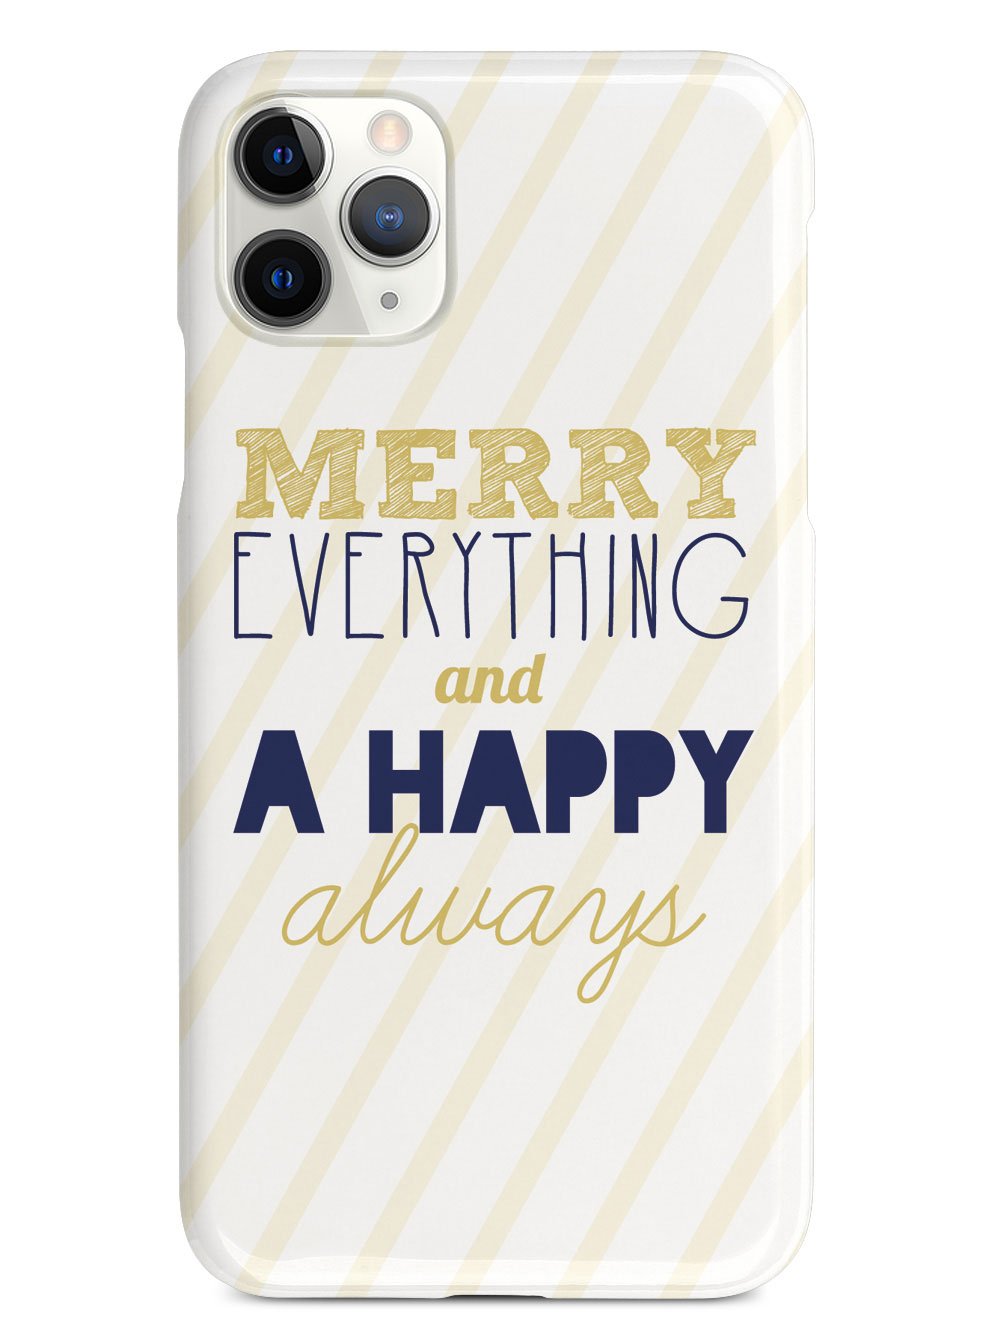 Merry Everything and A Happy Always Case